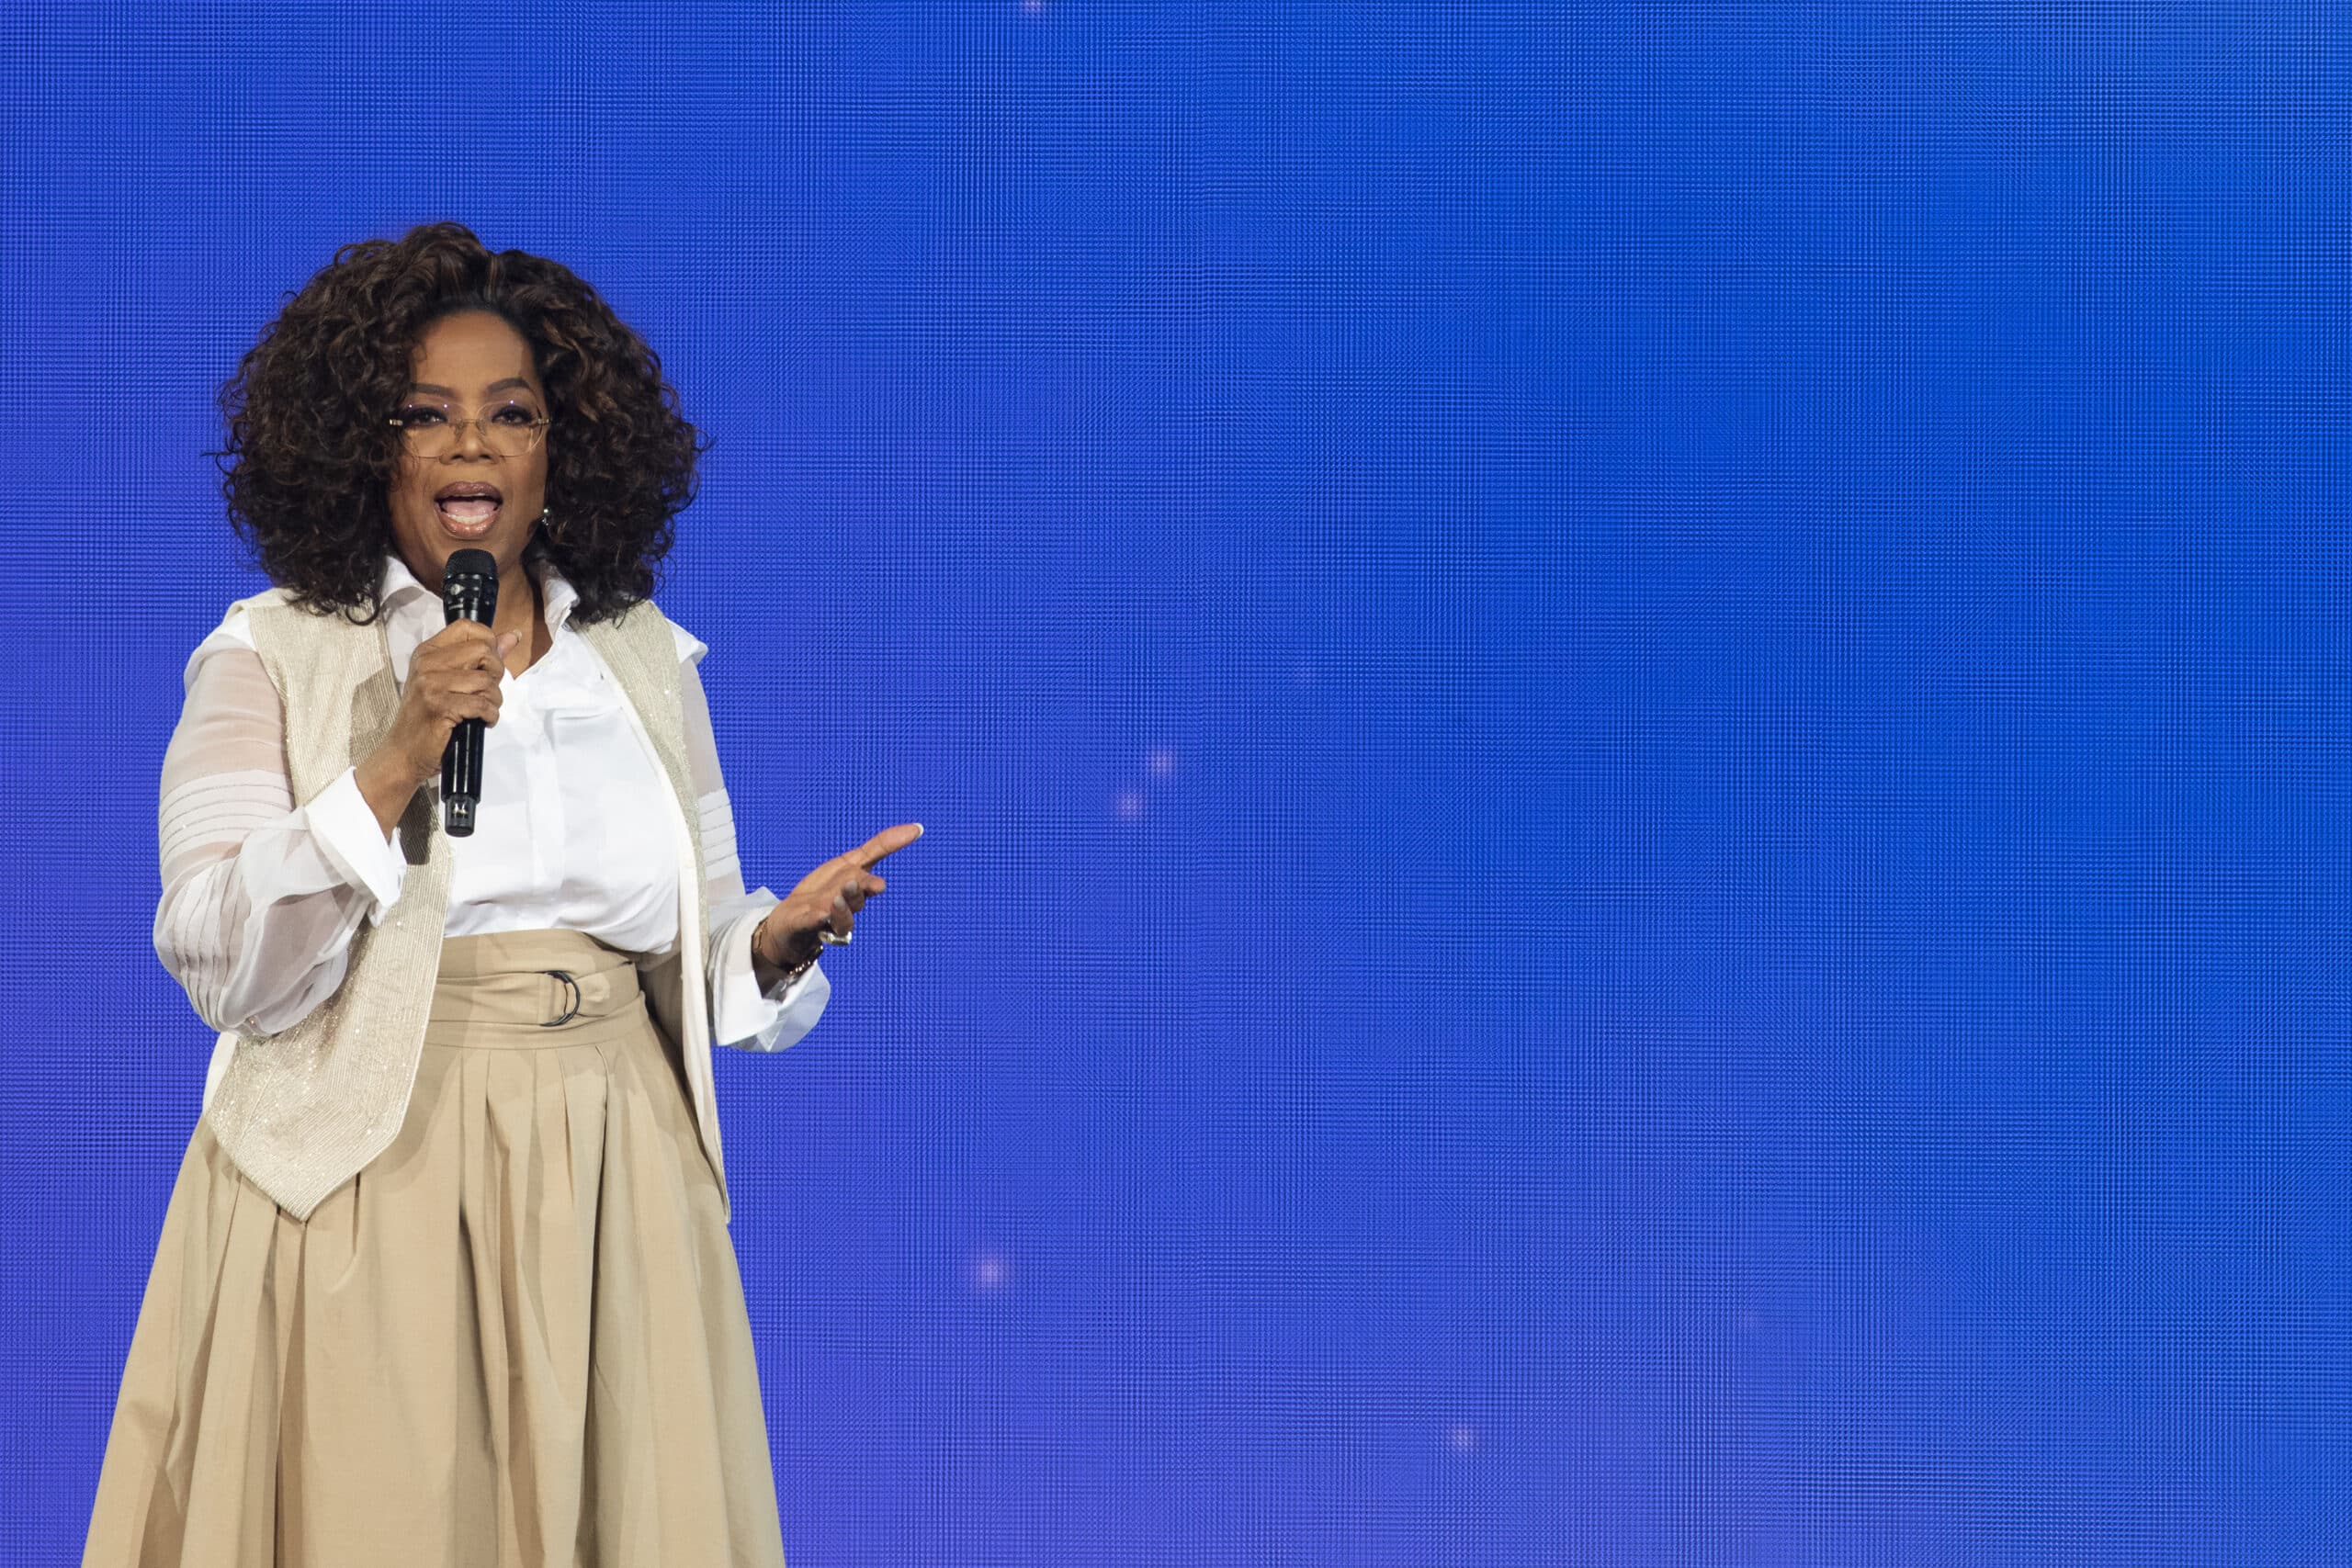 Oprah Winfrey: “Align Your Personality With Your Purpose”